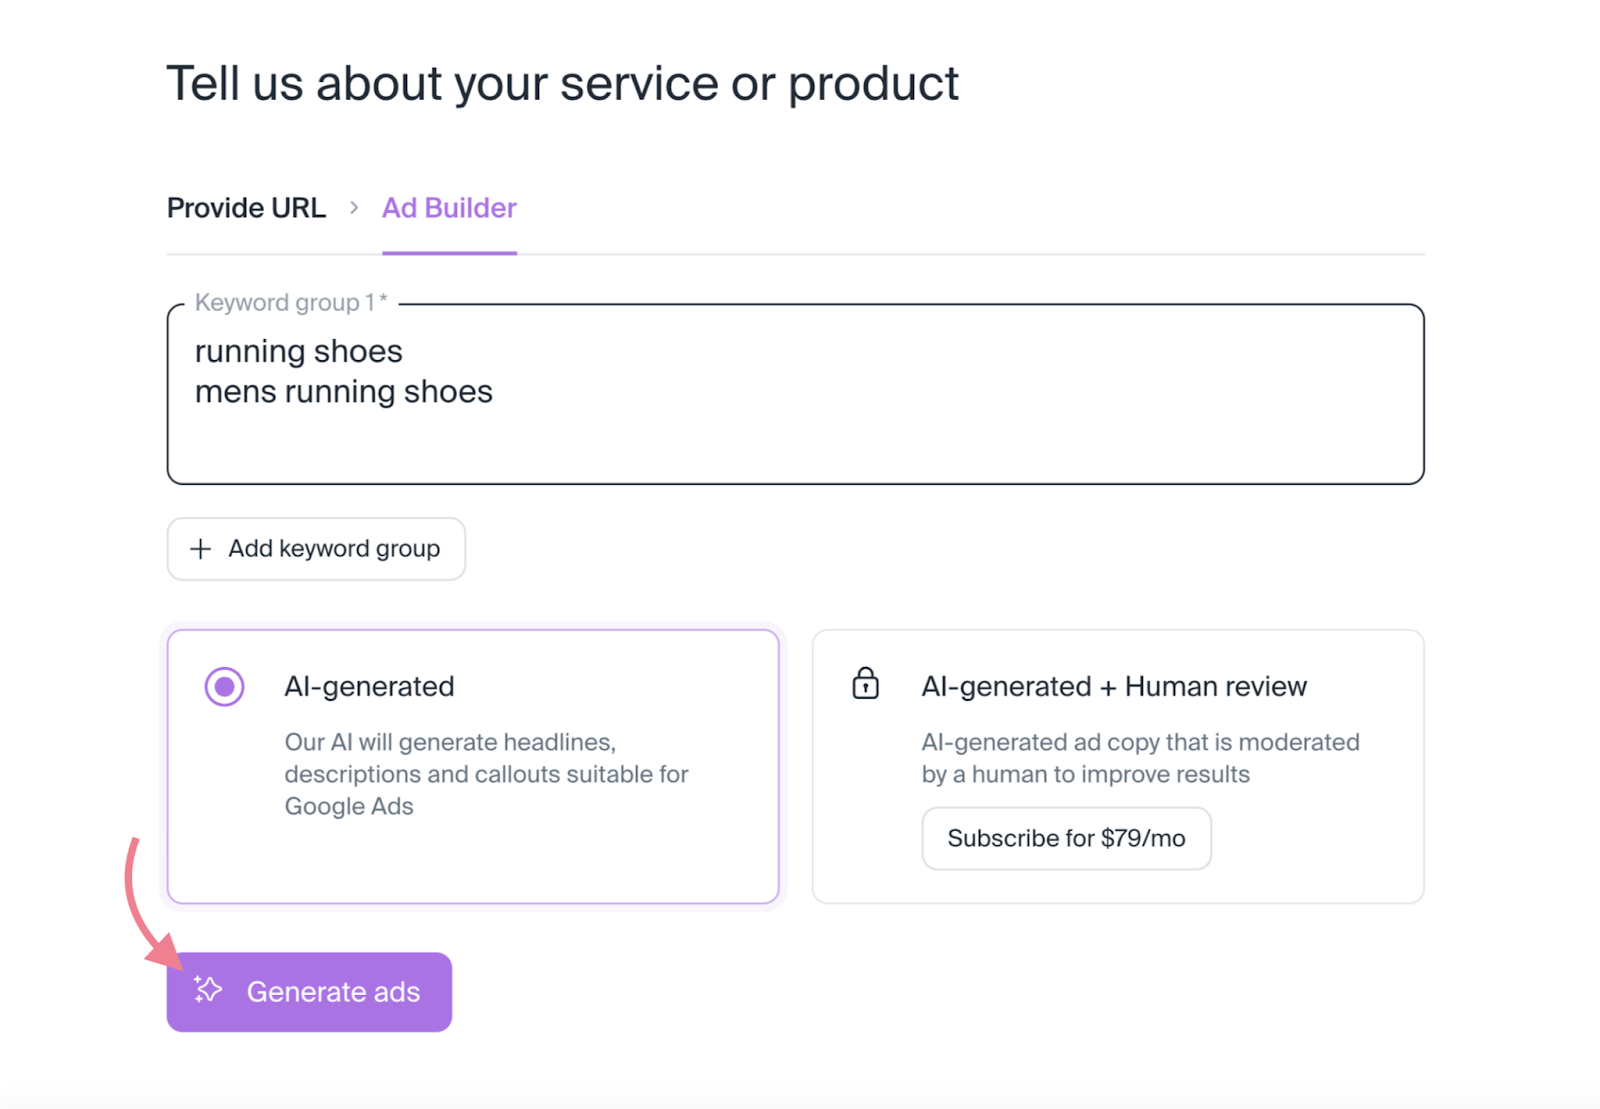 "Tell us about your service or product" page in AI Ad Copy Generator